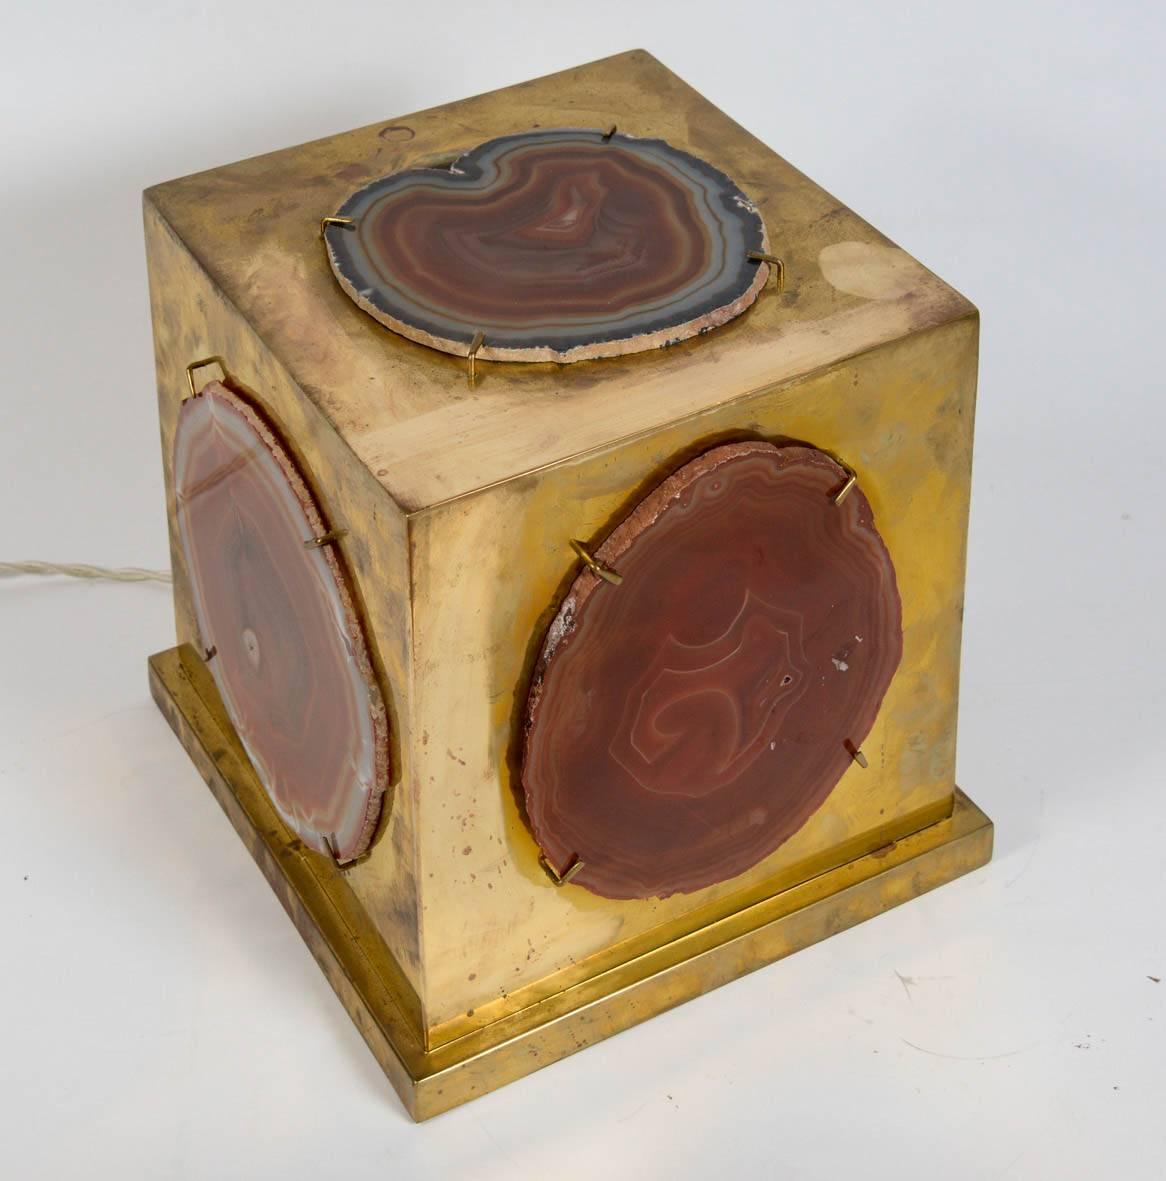 Square table lamp made of five brass panels each covered by an agate slice letting the light through.